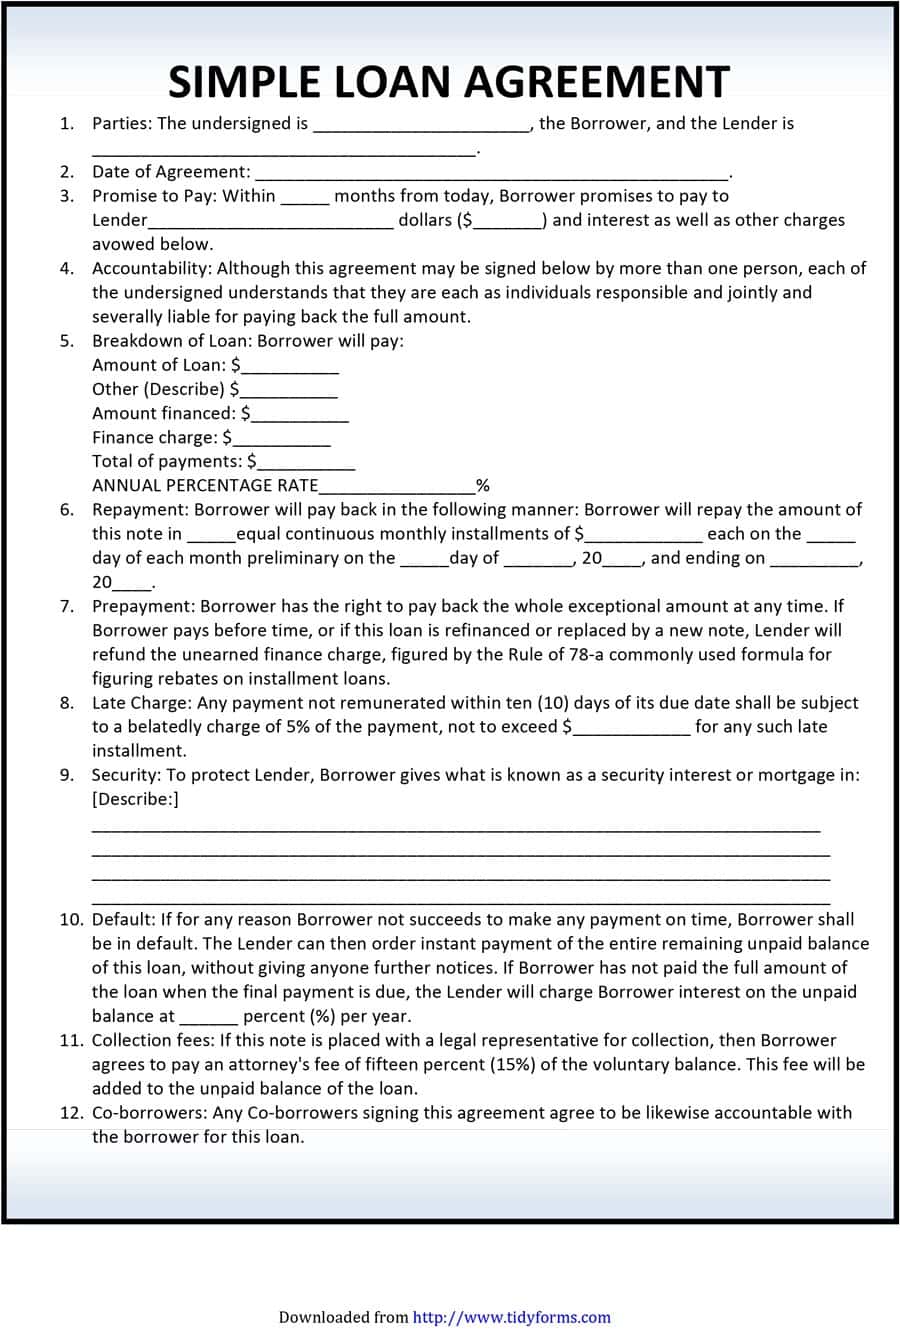 Free personal loan agreement form template   $1000 Approved in 2 